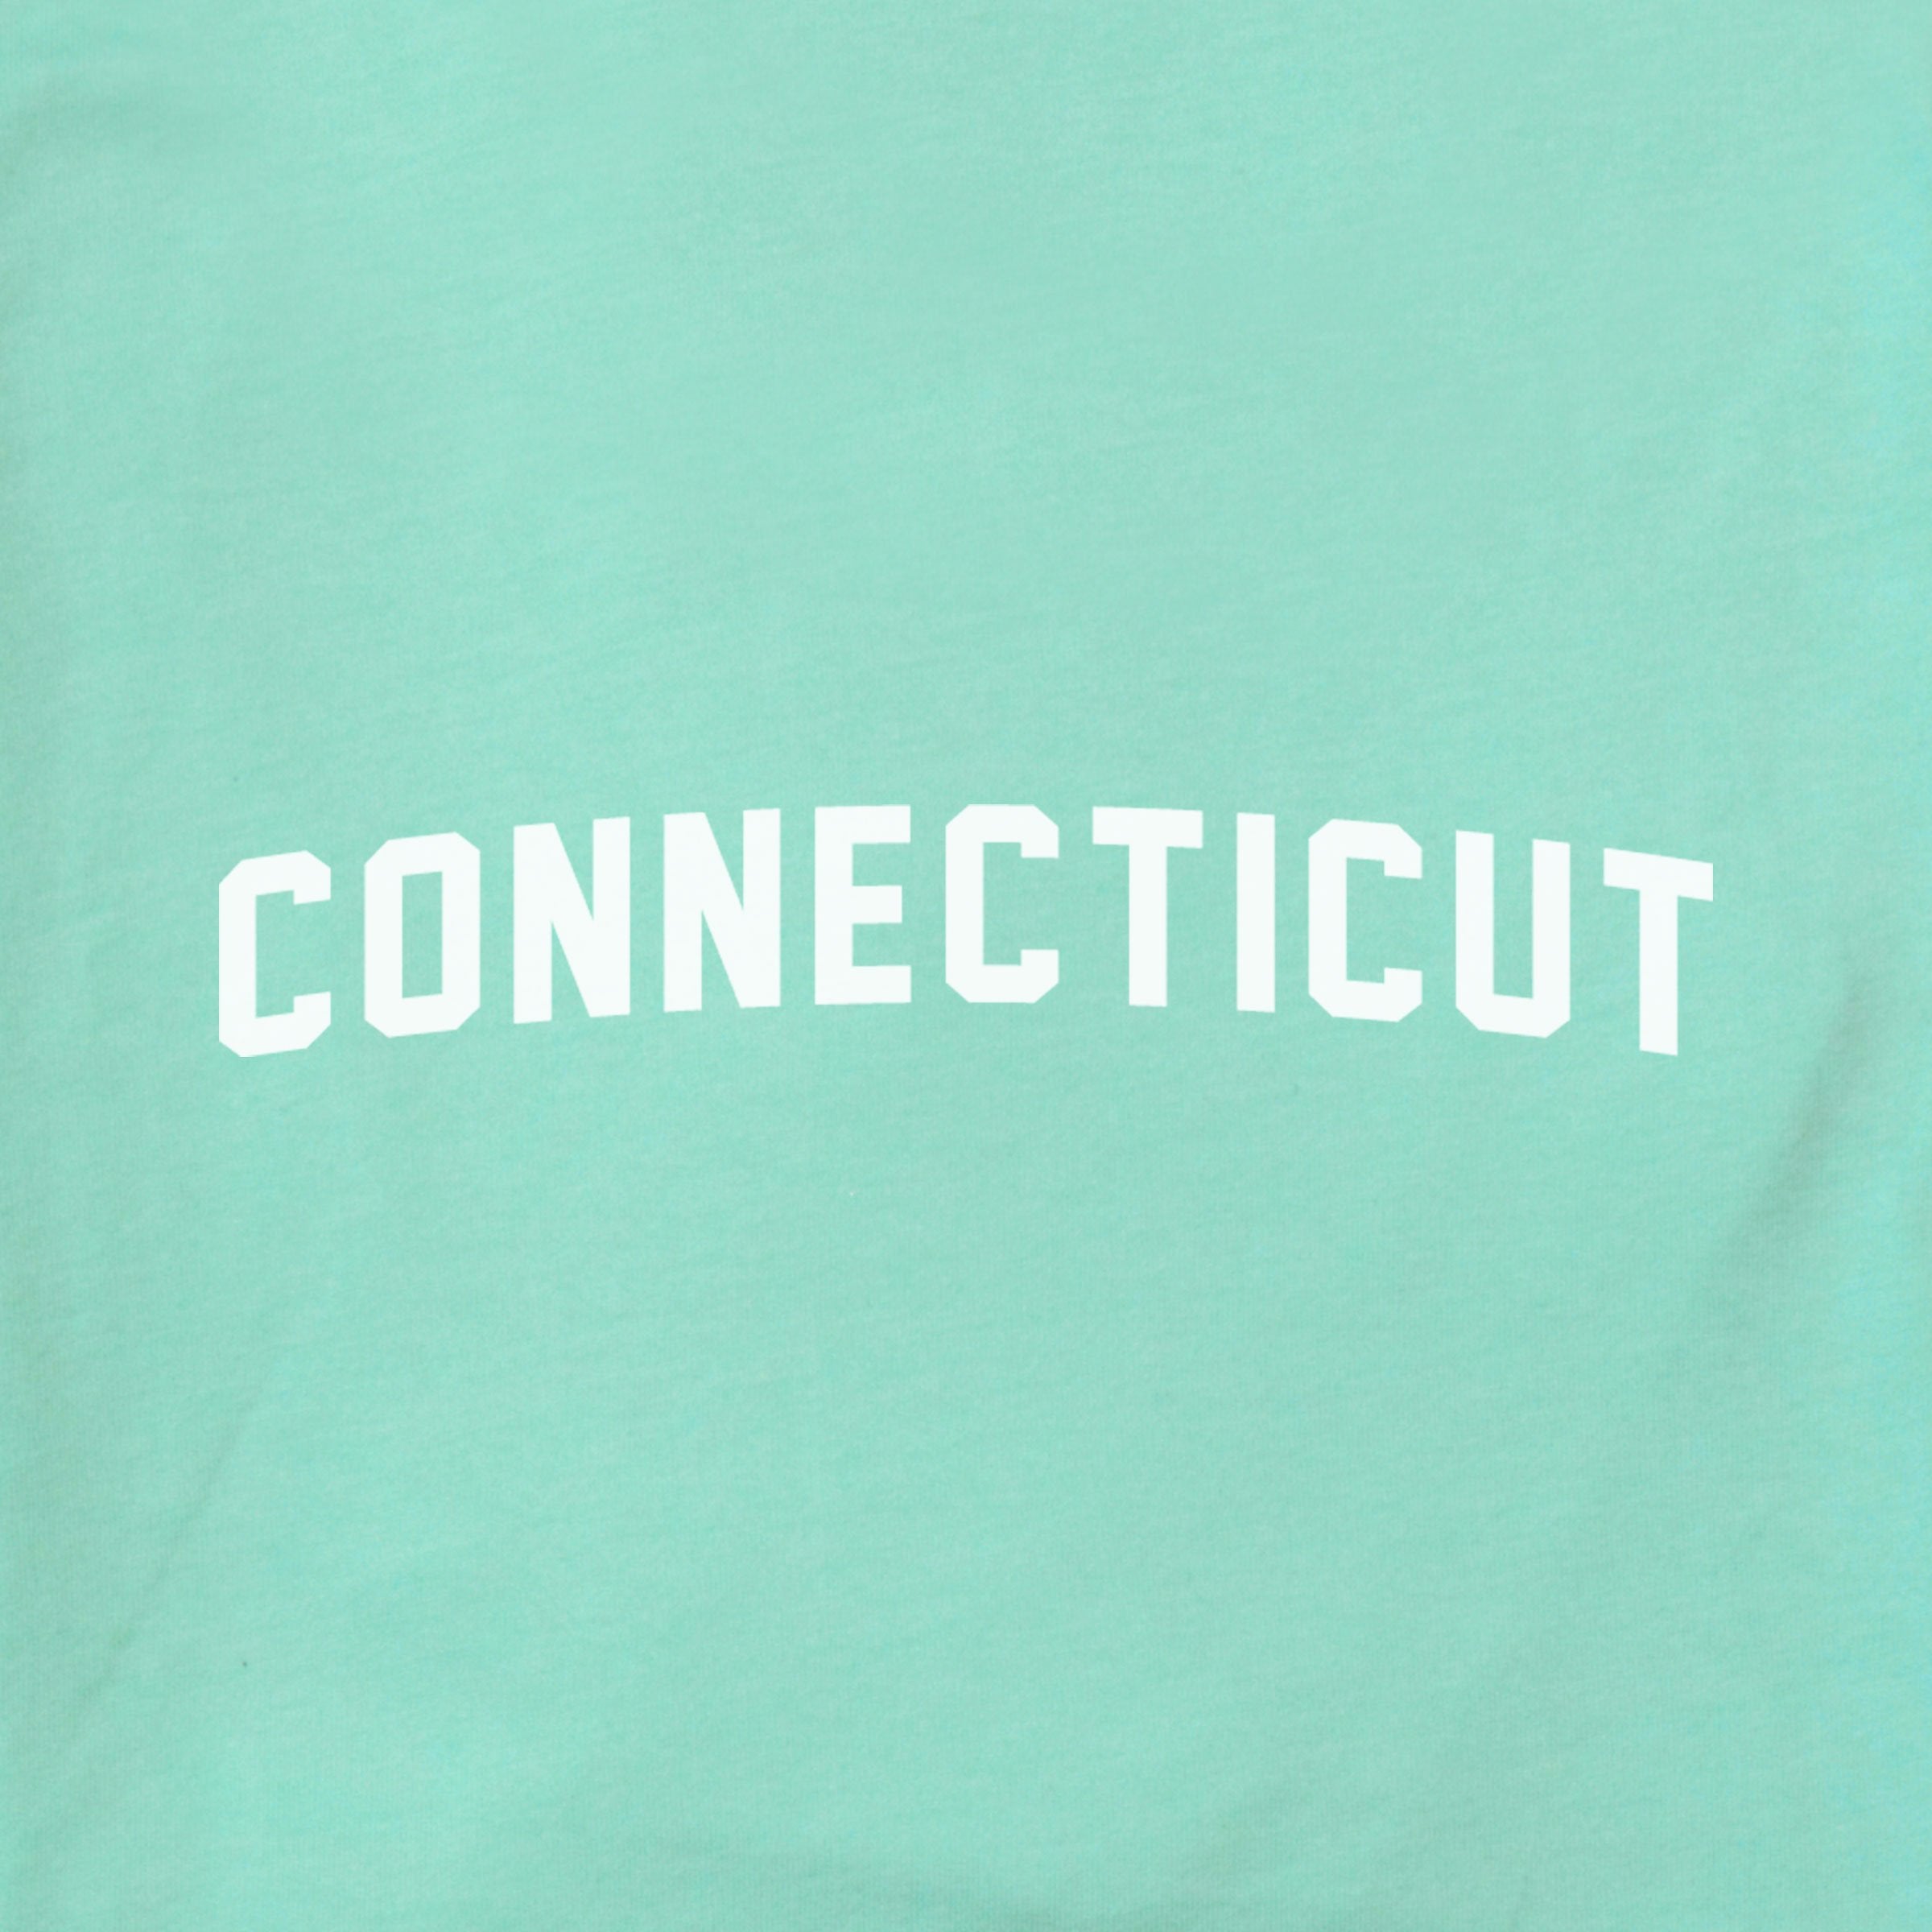 Connecticut Arched The Home T